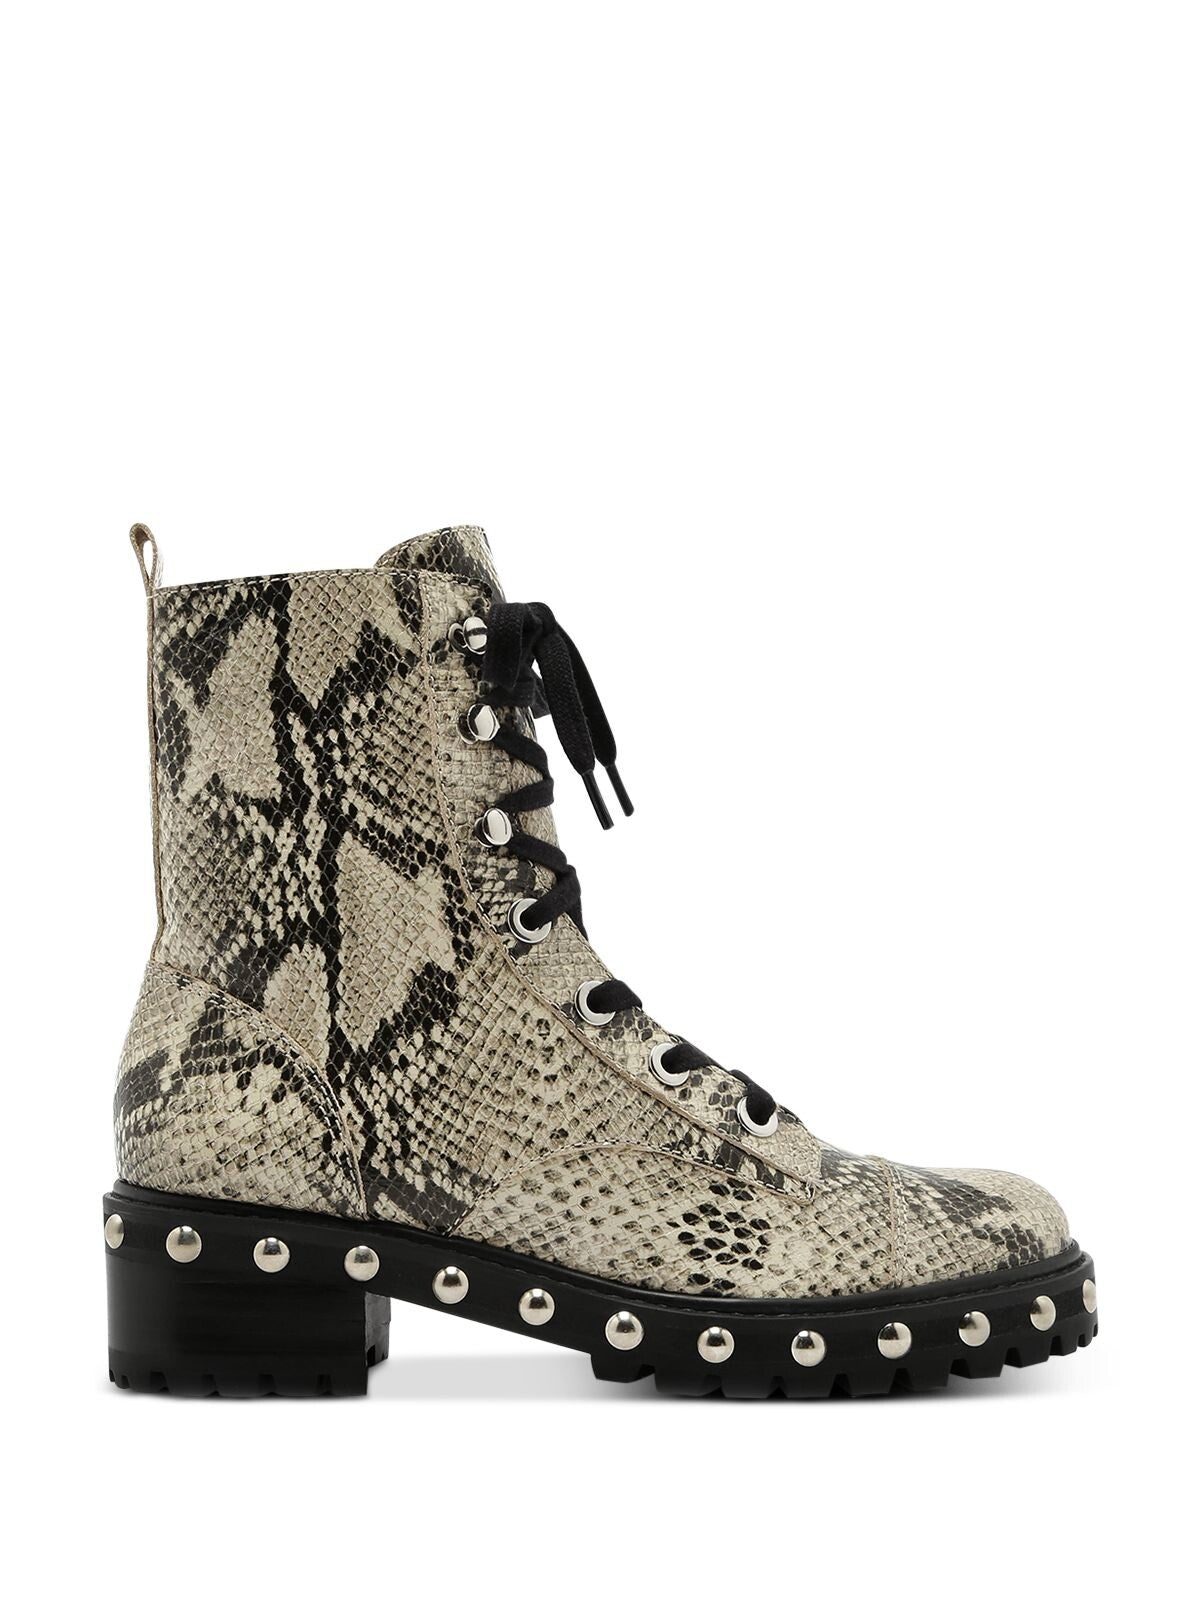 SCHUTZ Womens Beige Snake Print Lace Up Toe Cap Studded Lug Sole Andrea Round Toe Wedge Zip-Up Leather Combat Boots 7 B